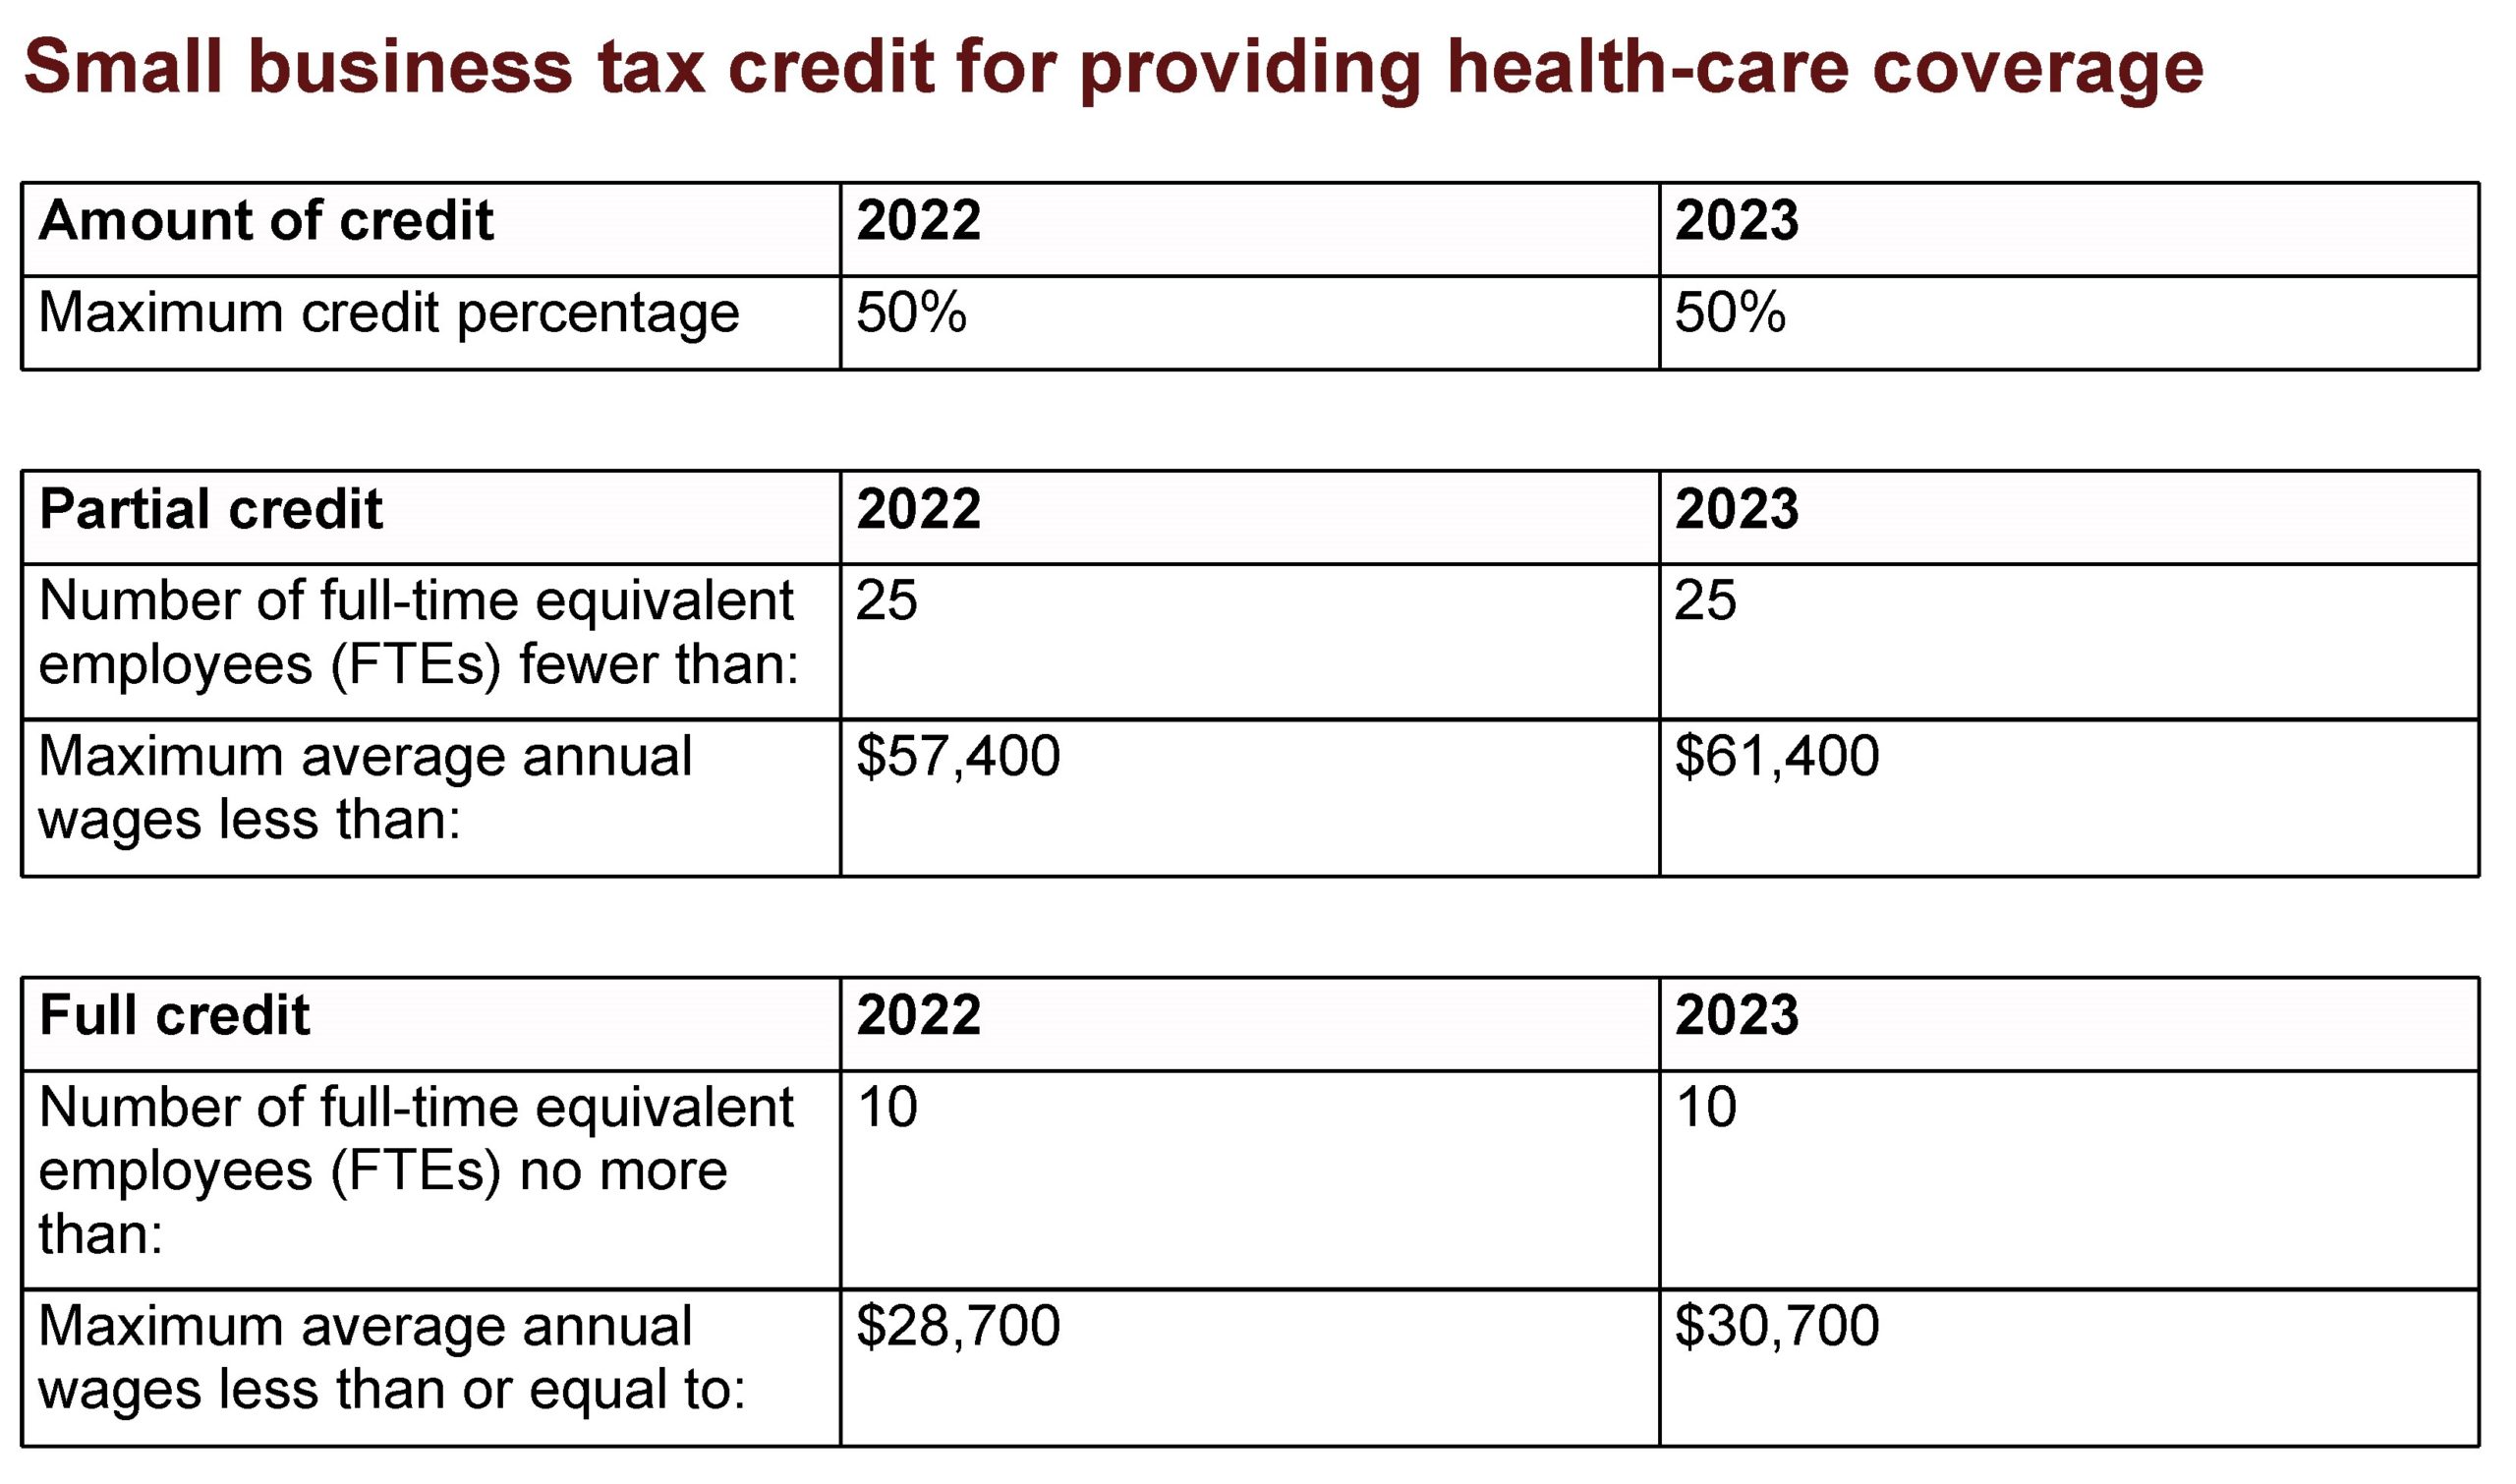 Small Business Tax Credit for Providing Health-Care Coverage